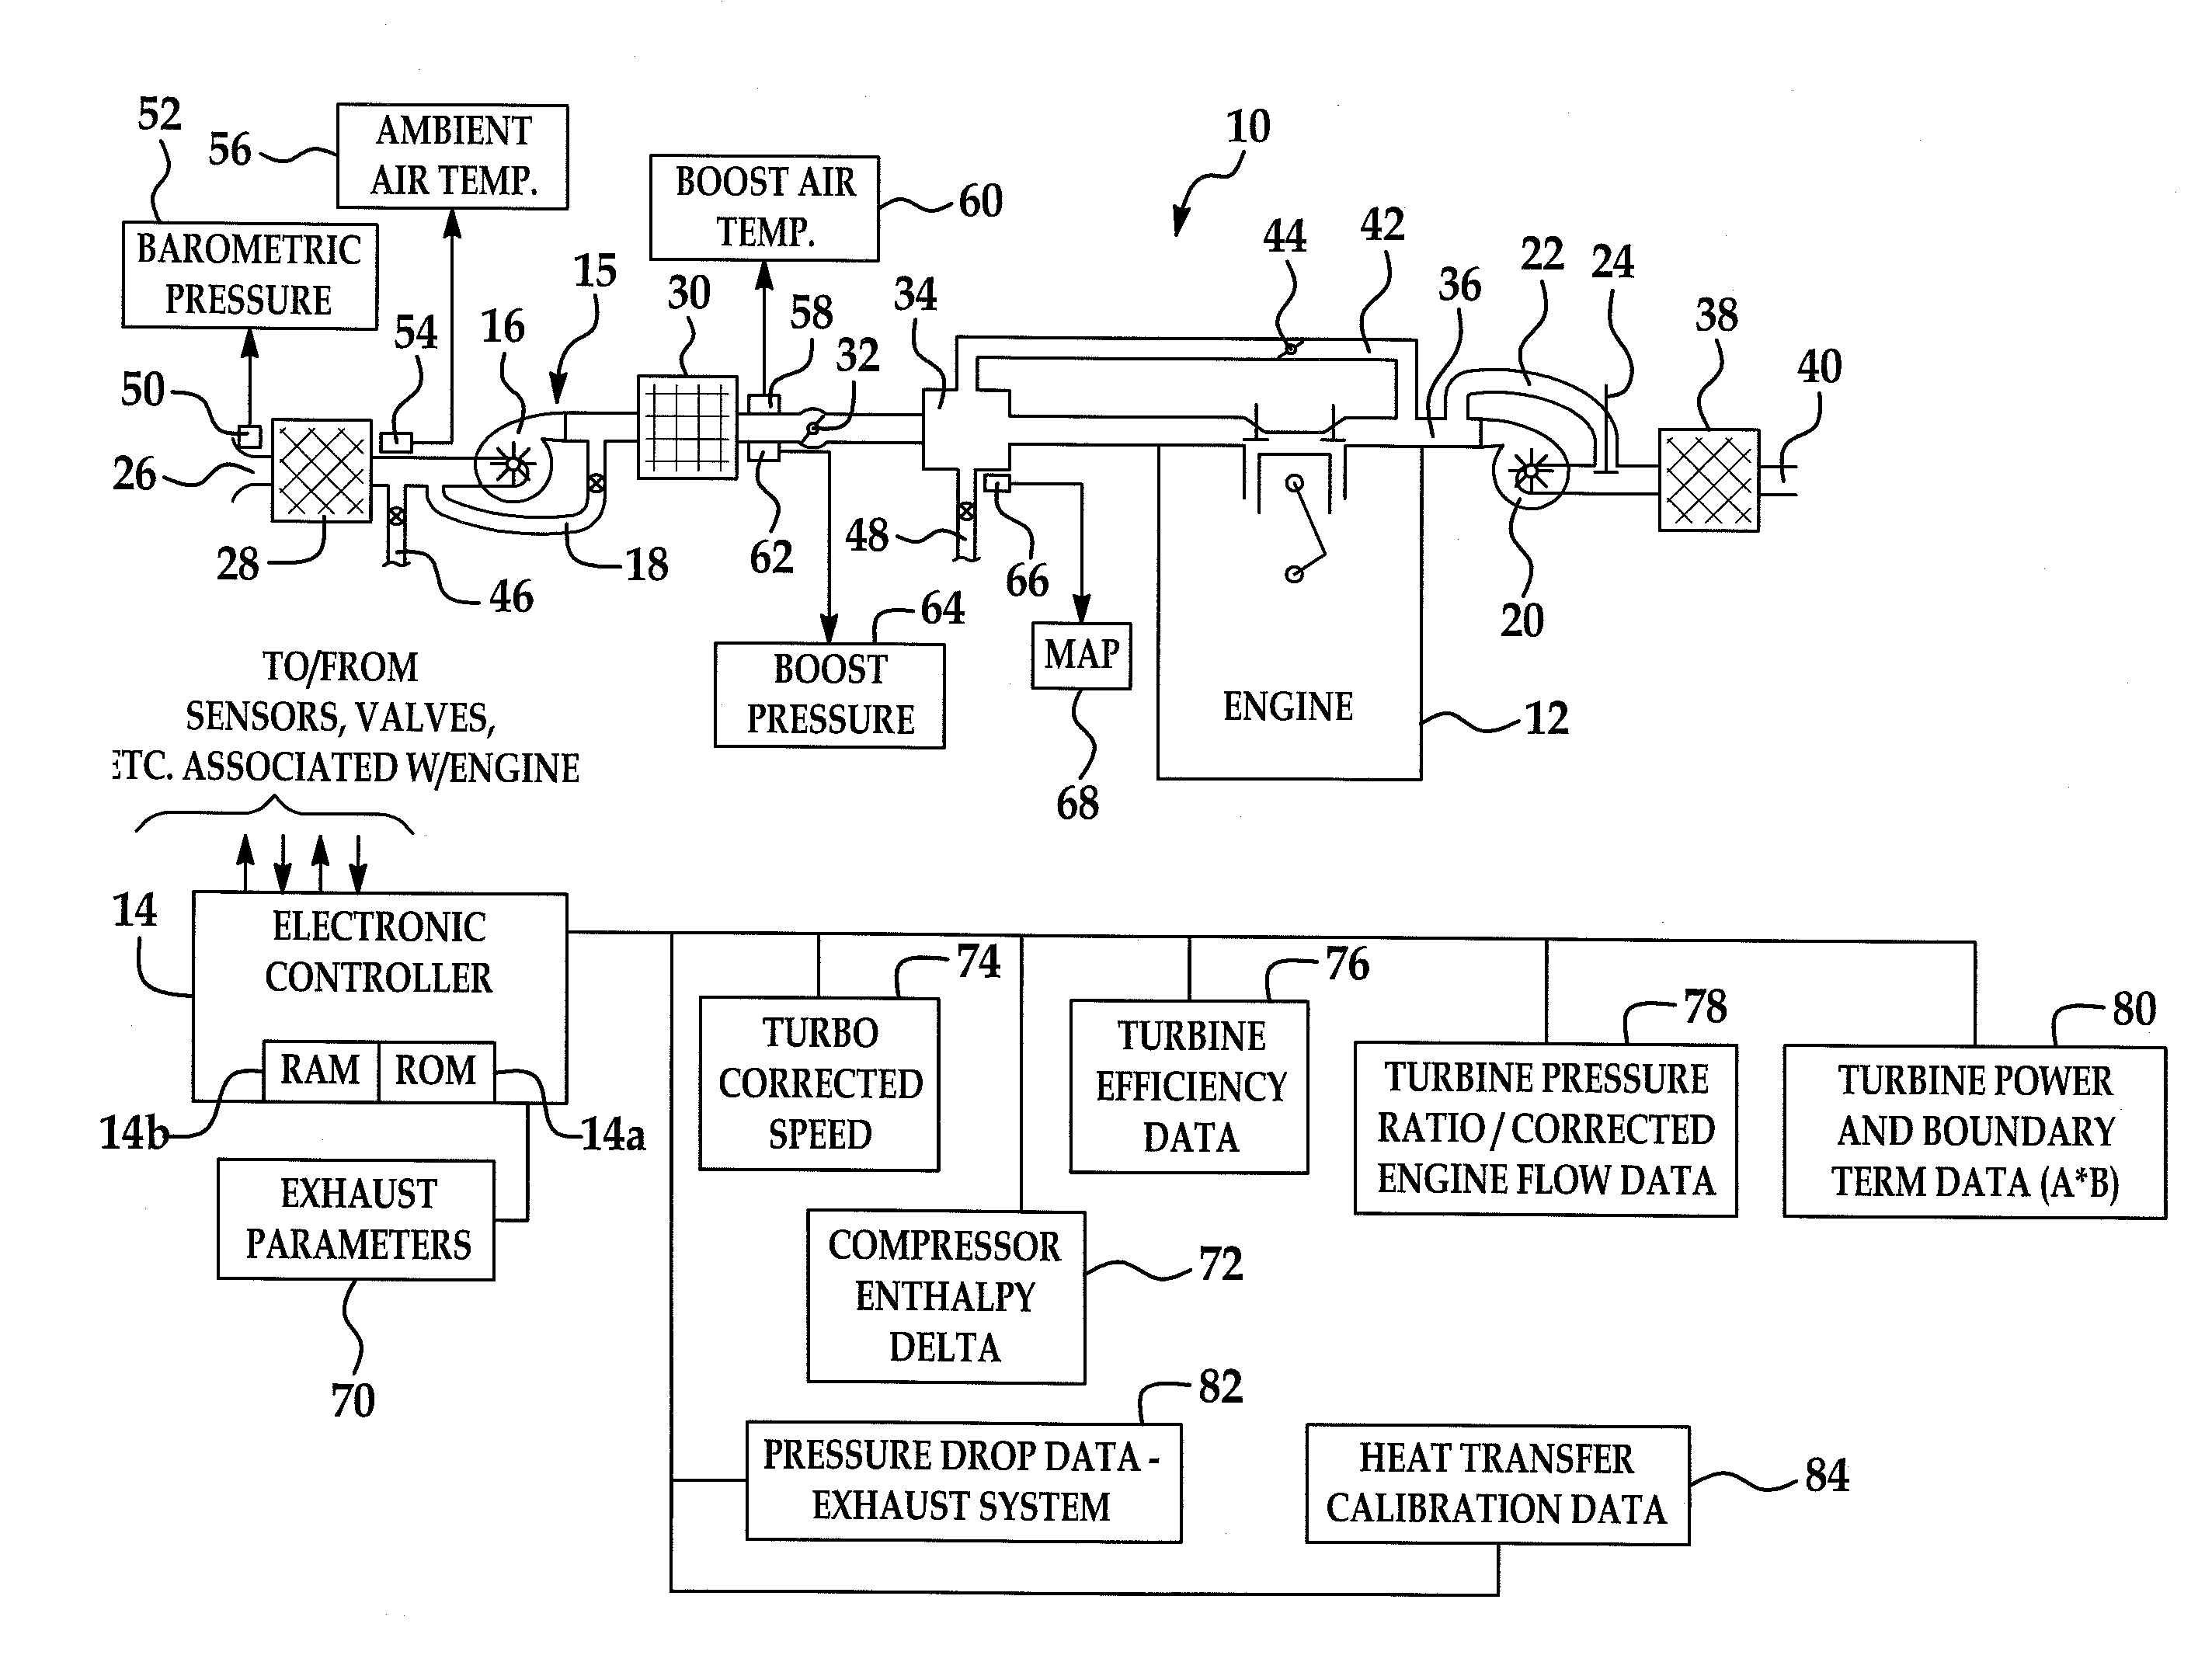 System and method for modeling of turbo-charged engines and indirect measurement of turbine and waste-gate flow and turbine efficiency